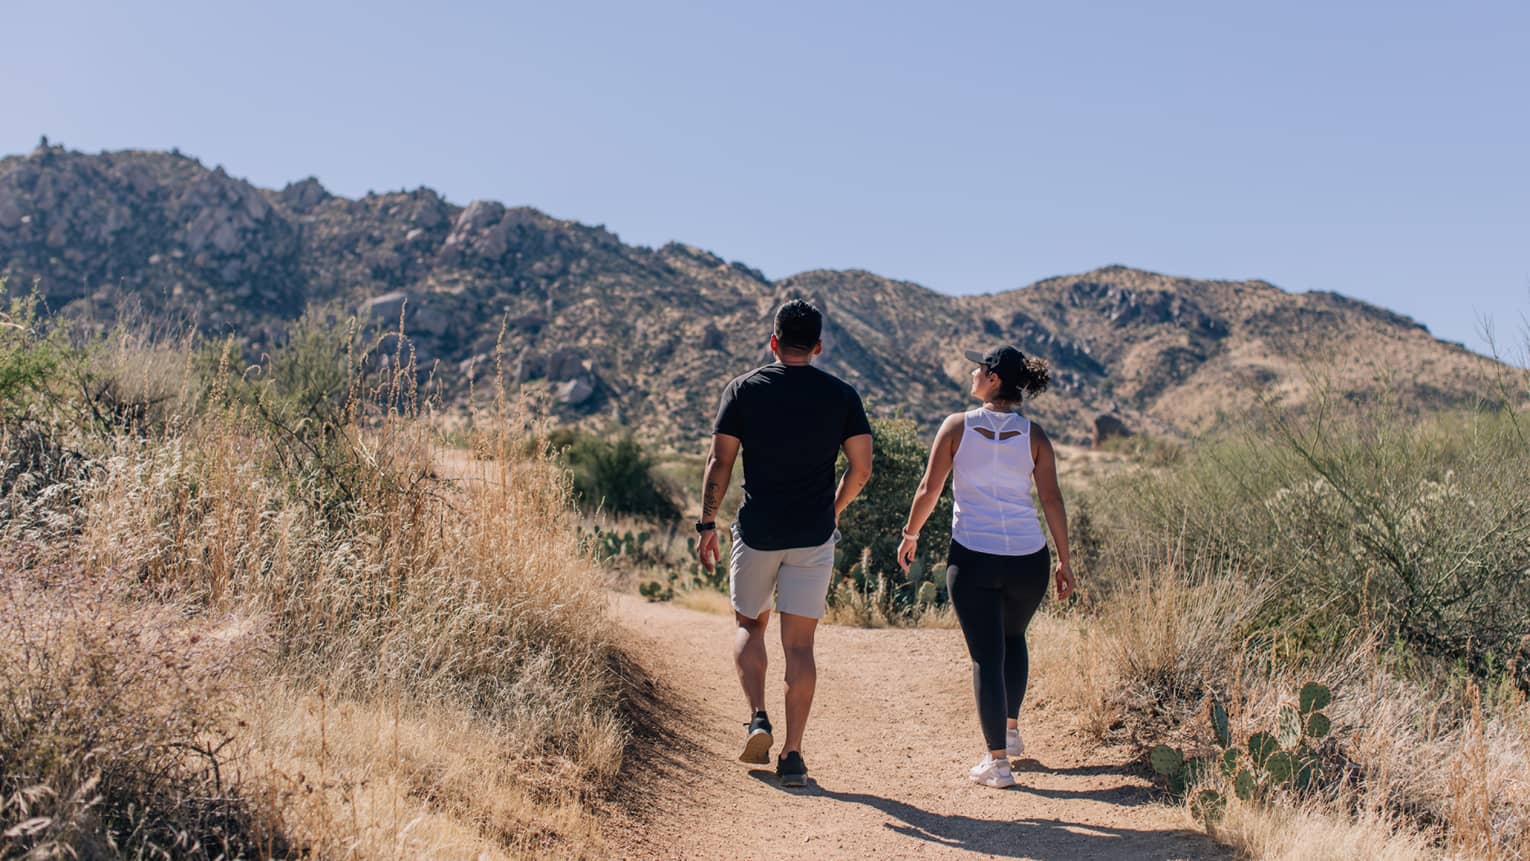 A man and woman in casual clothing walking along brush towards hills in the distance.